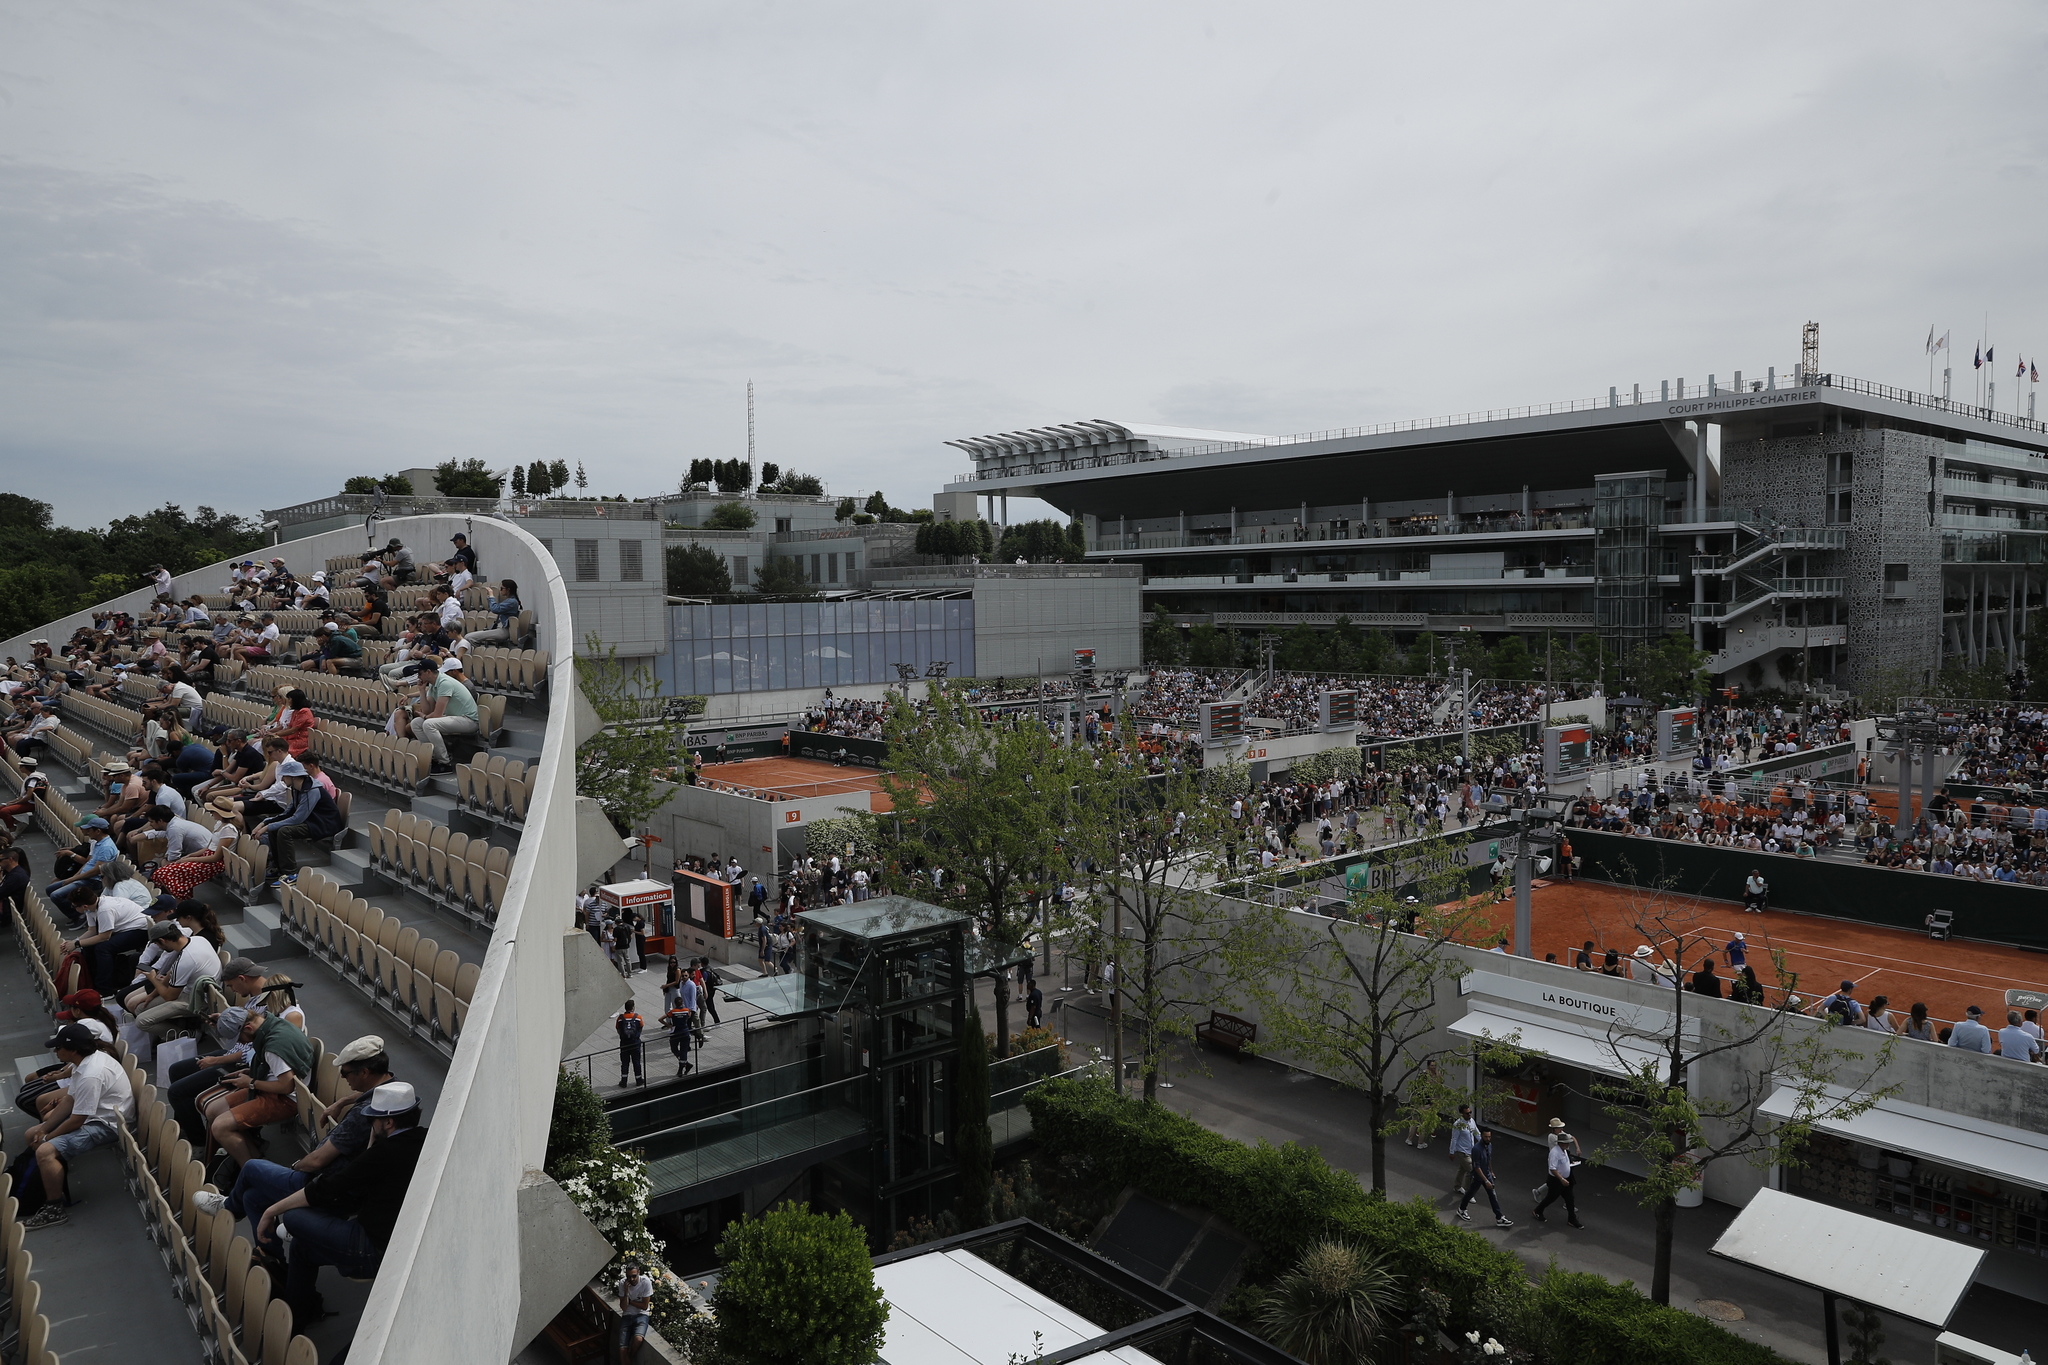 Paris (France), 22/05/2022.- A general view of Roland Garros tennis courts with Court Philippe  lt;HIT gt;Chatrier lt;/HIT gt; (back-R) during the first day of the French Open tennis tournament in Paris, France, 22 May 2022. (Tenis, Abierto, Francia) EFE/EPA/CHRISTOPHE PETIT TESSON